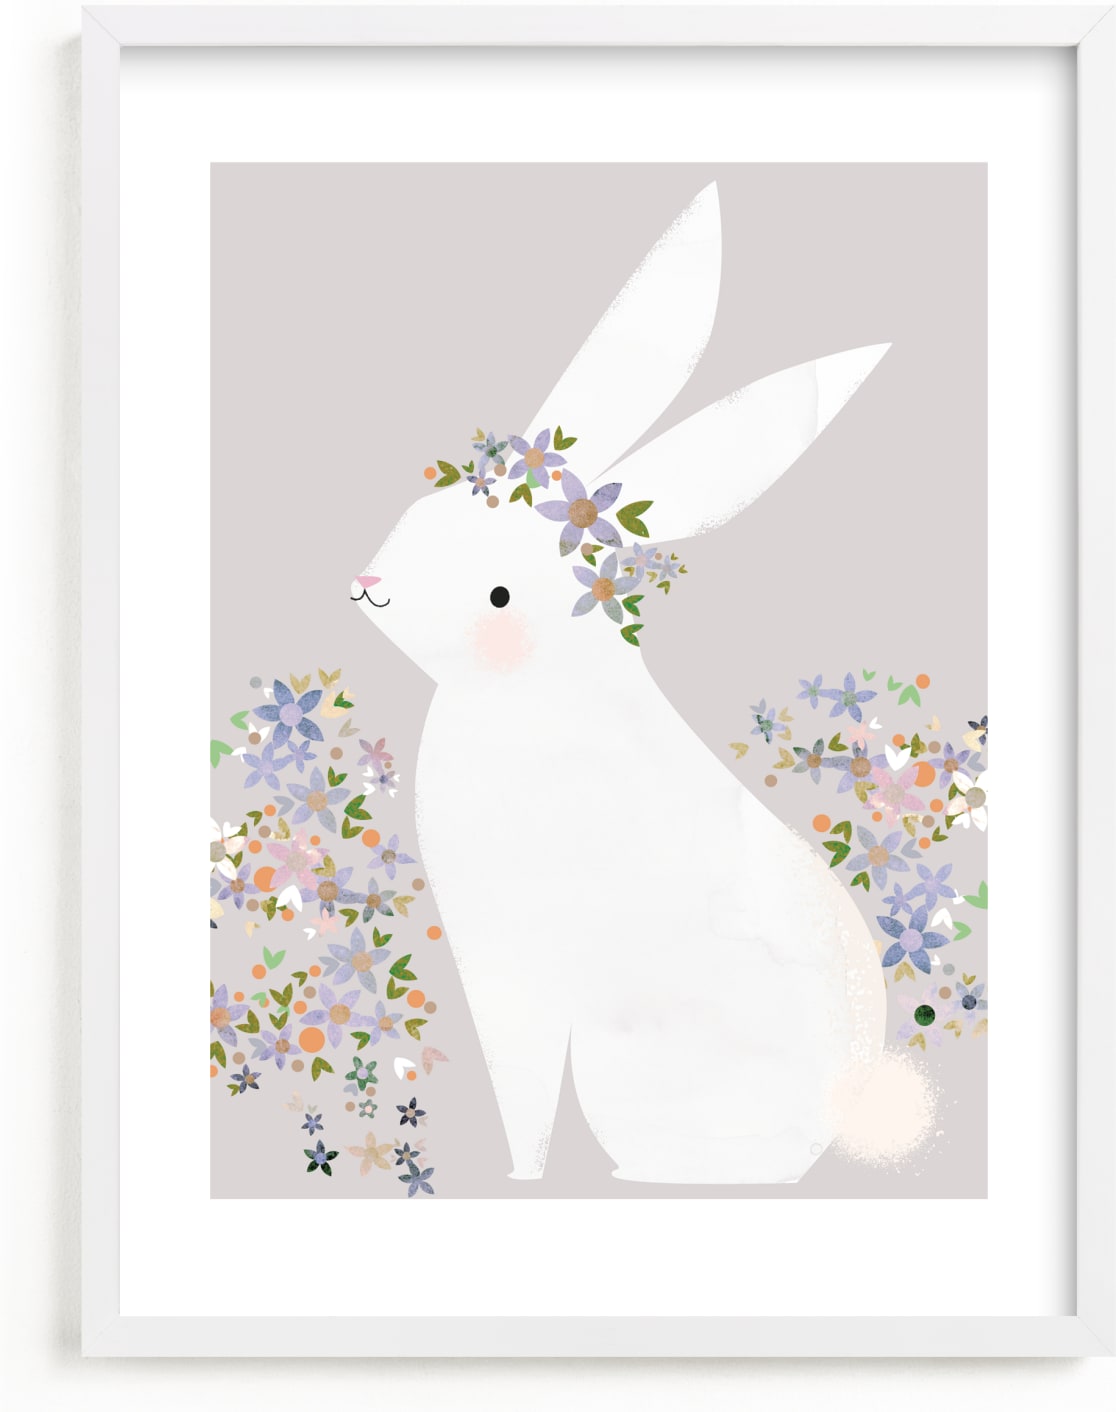 This is a colorful art by Lori Wemple called Bunny.